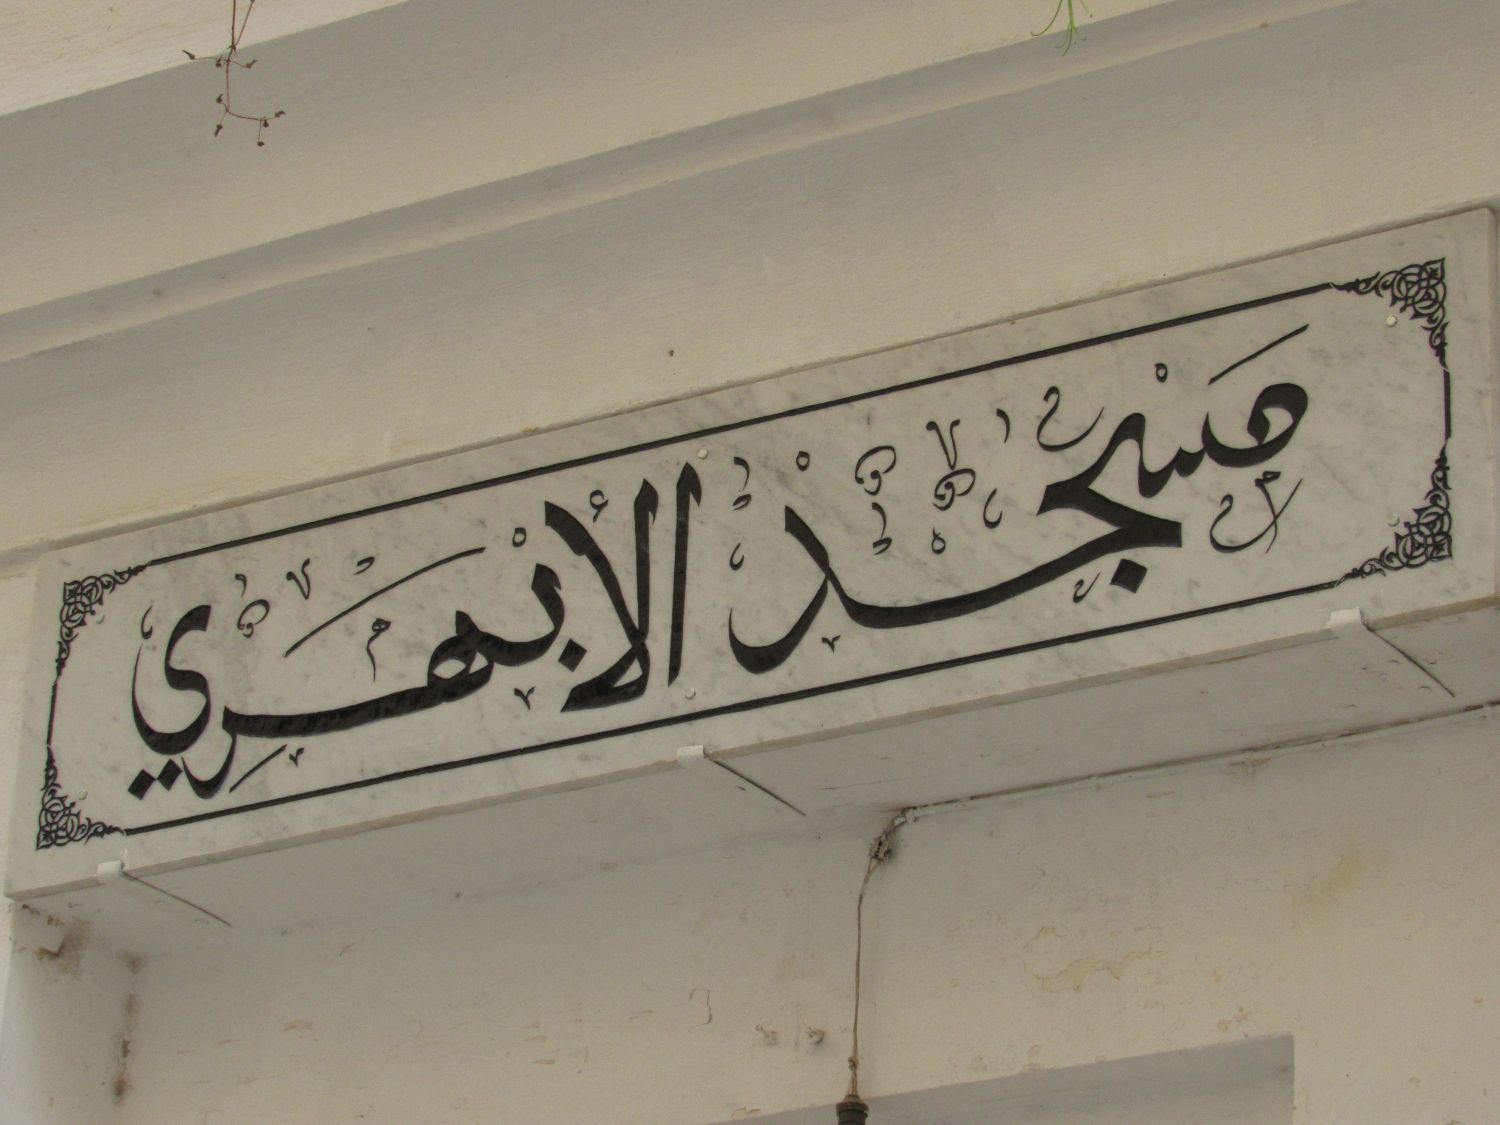 Exterior view, mosque name laid in stone above the entranceway.